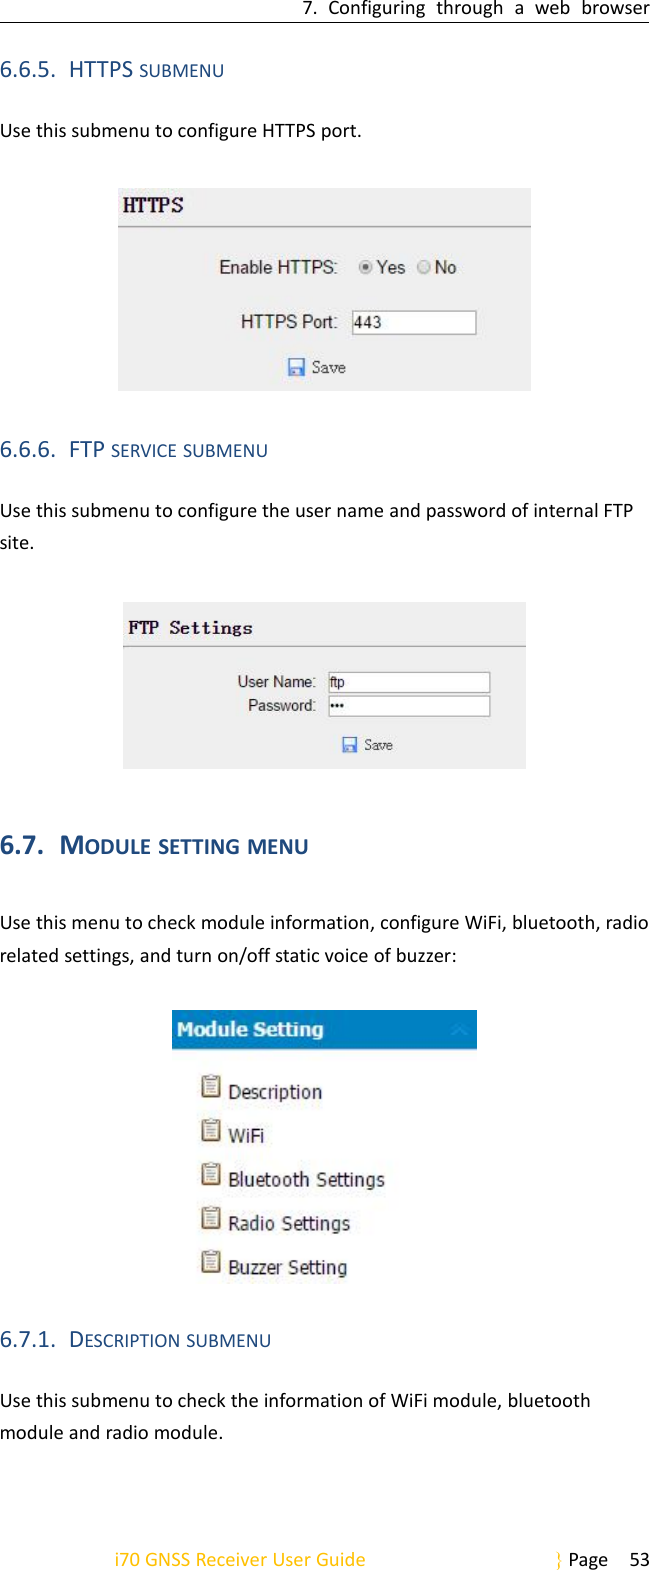 7. Configuring through a web browseri70 GNSS Receiver User Guide Page 536.6.5. HTTPS SUBMENUUse this submenu to configure HTTPS port.6.6.6. FTP SERVICE SUBMENUUse this submenu to configure the user name and password of internal FTPsite.6.7. MODULE SETTING MENUUse this menu to check module information, configure WiFi, bluetooth, radiorelated settings, and turn on/off static voice of buzzer:6.7.1. DESCRIPTION SUBMENUUse this submenu to check the information of WiFi module, bluetoothmodule and radio module.